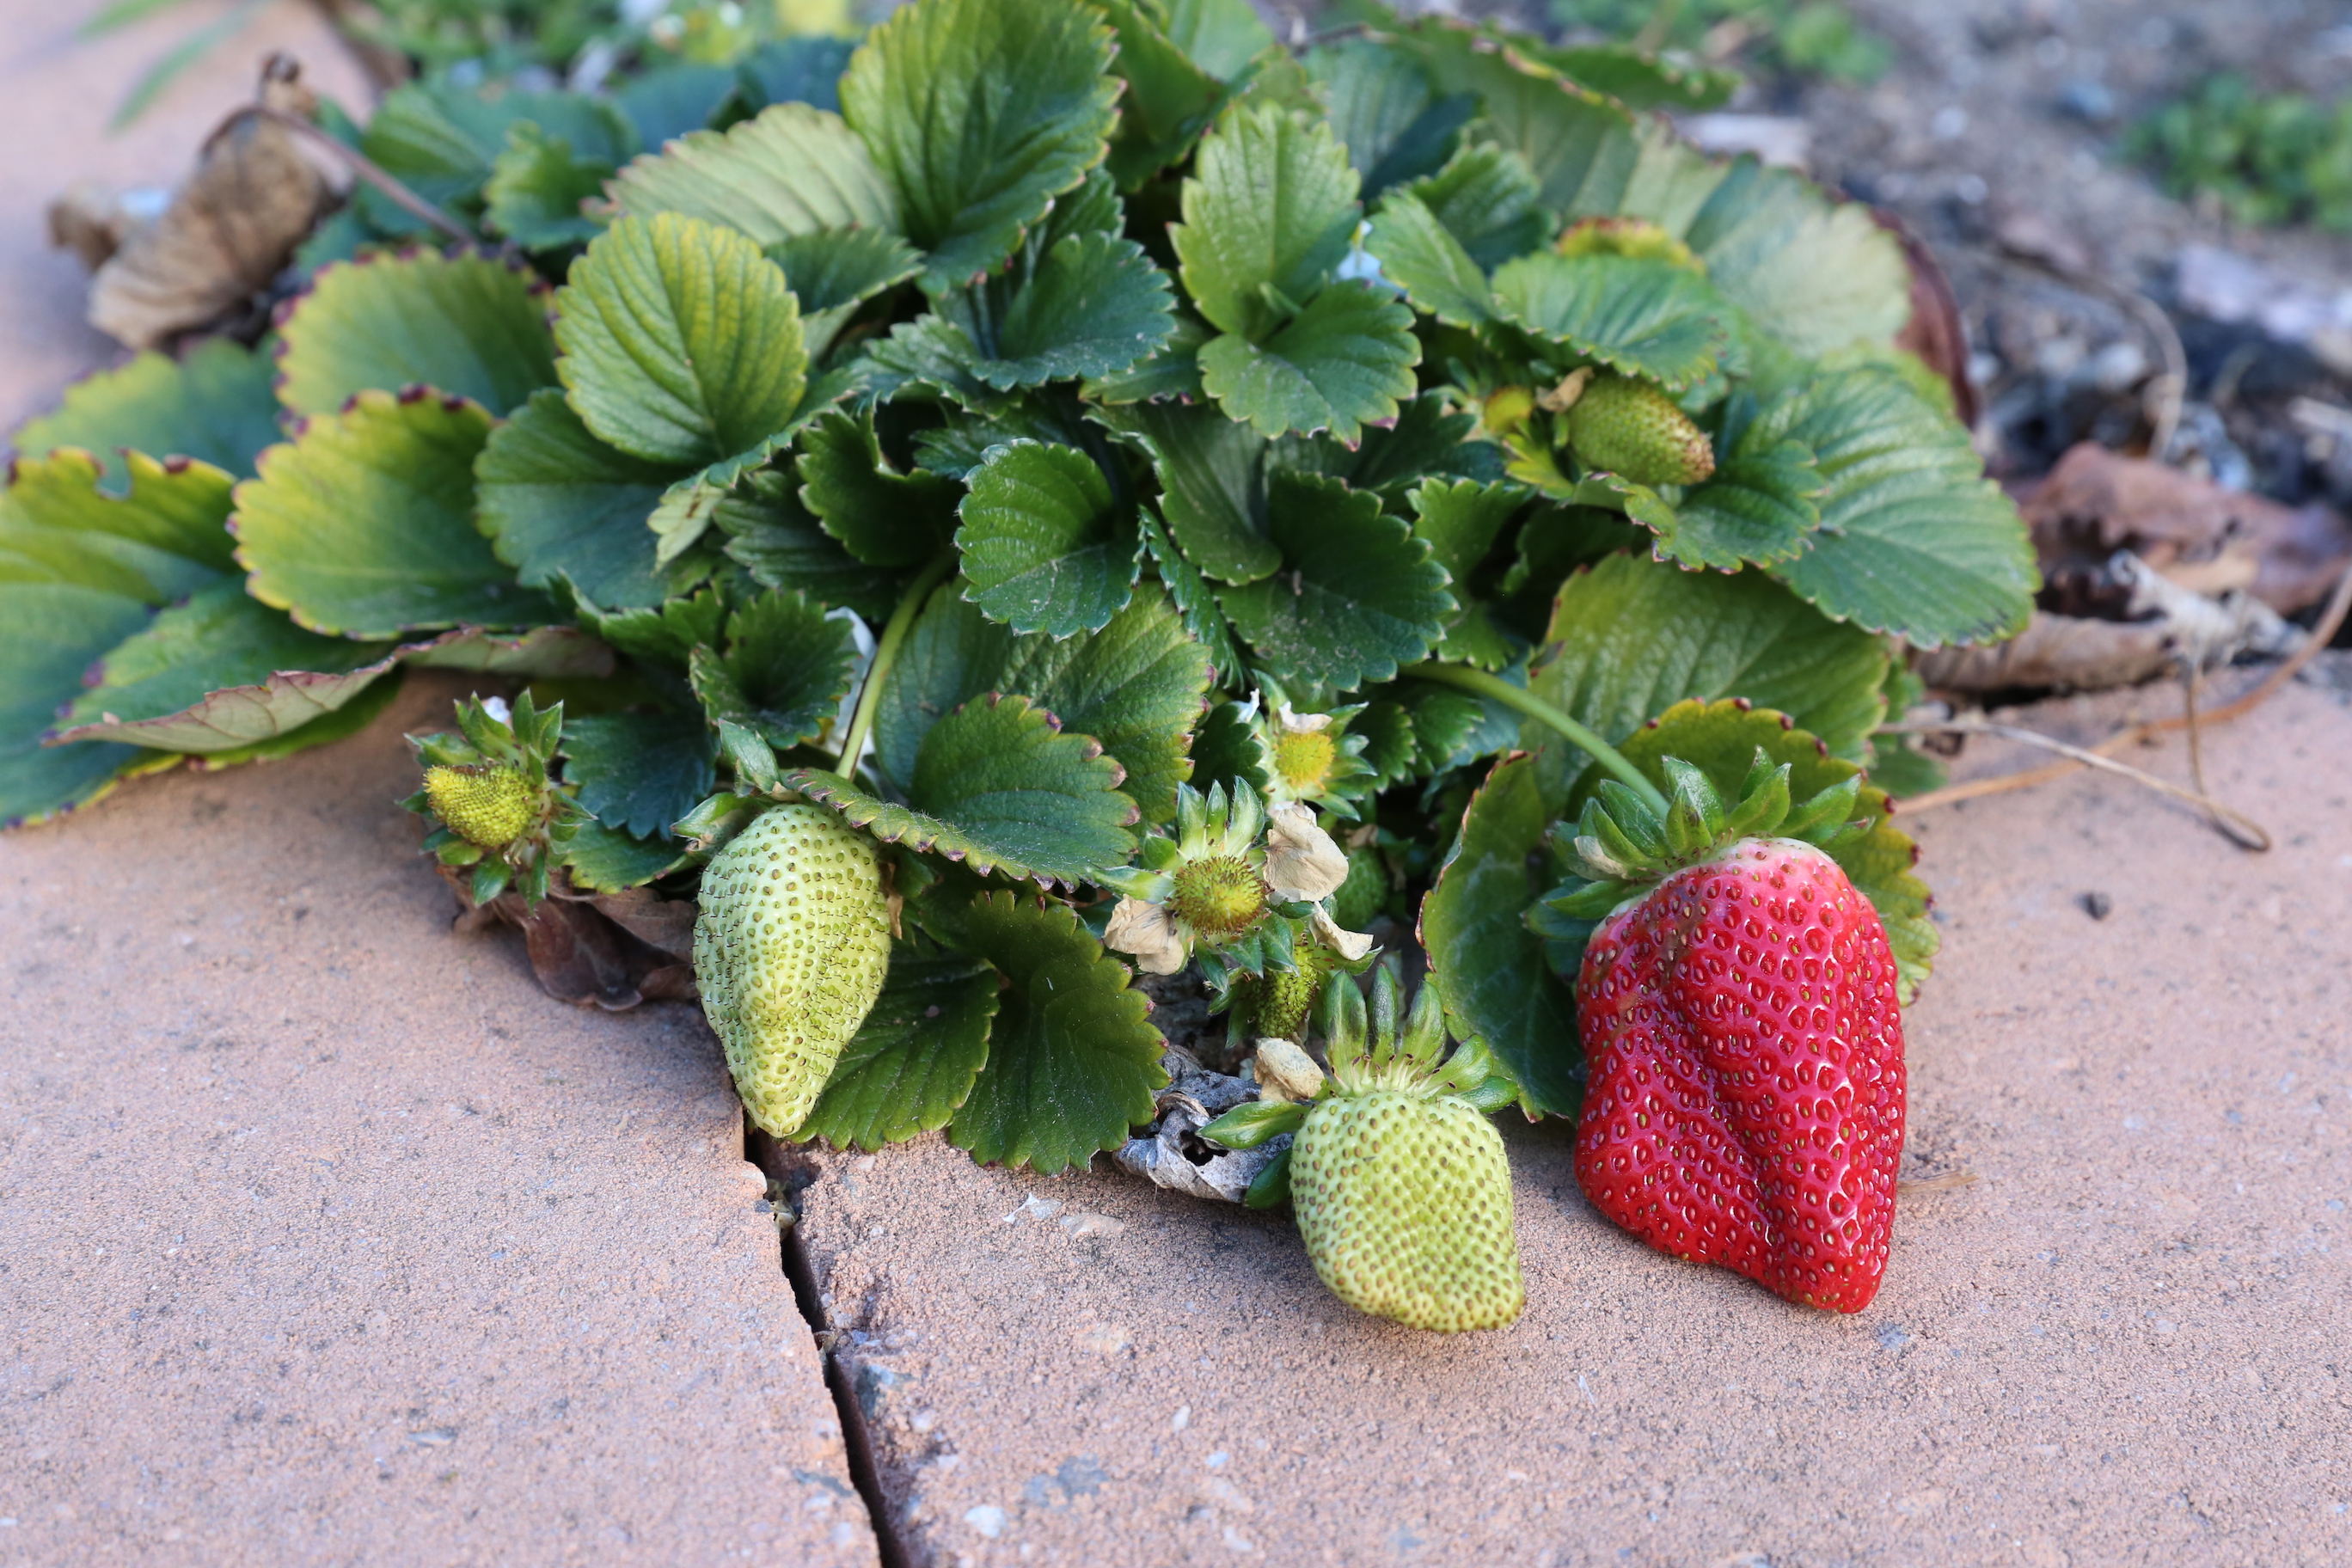 Strawberries have been planted in the corners of the vegetable garden beds. The plan is to let them run and make new plants all around the edge of the garden beds.